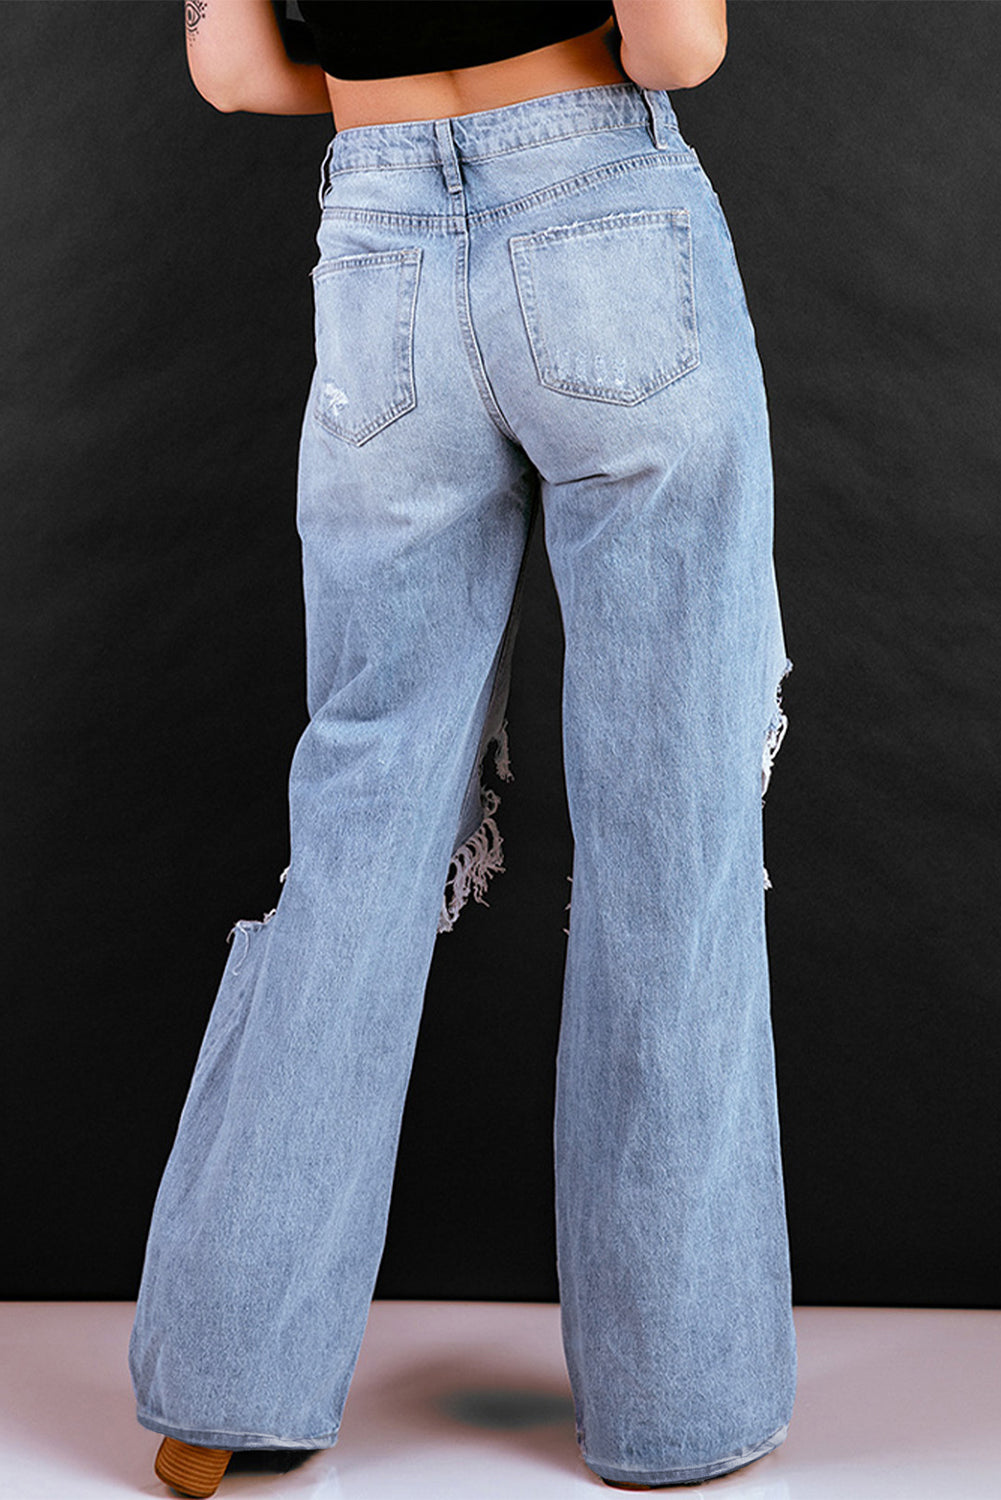 Sky Blue Distressed Ripped Hollow-out Wide Leg Jeans Jeans JT's Designer Fashion